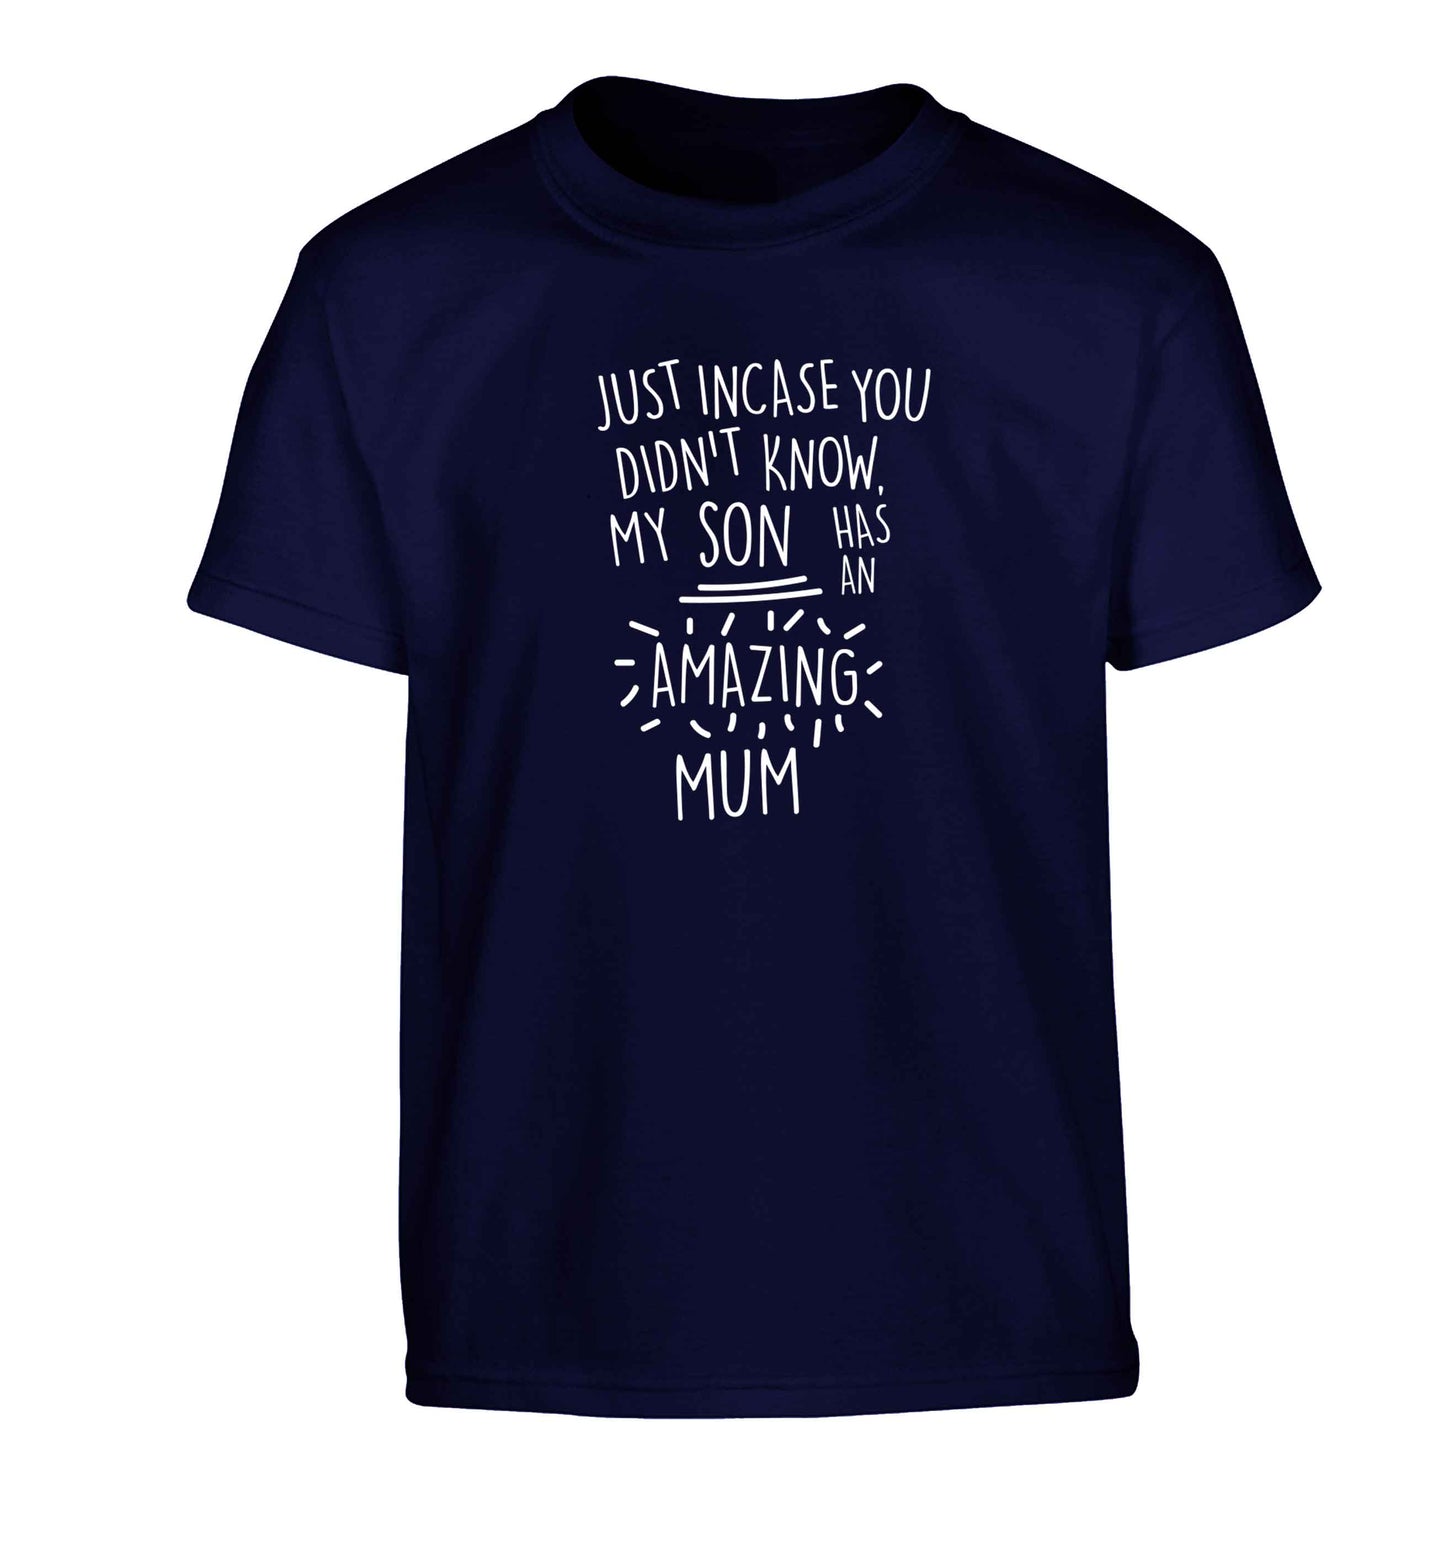 Just incase you didn't know my son has an amazing mum Children's navy Tshirt 12-13 Years